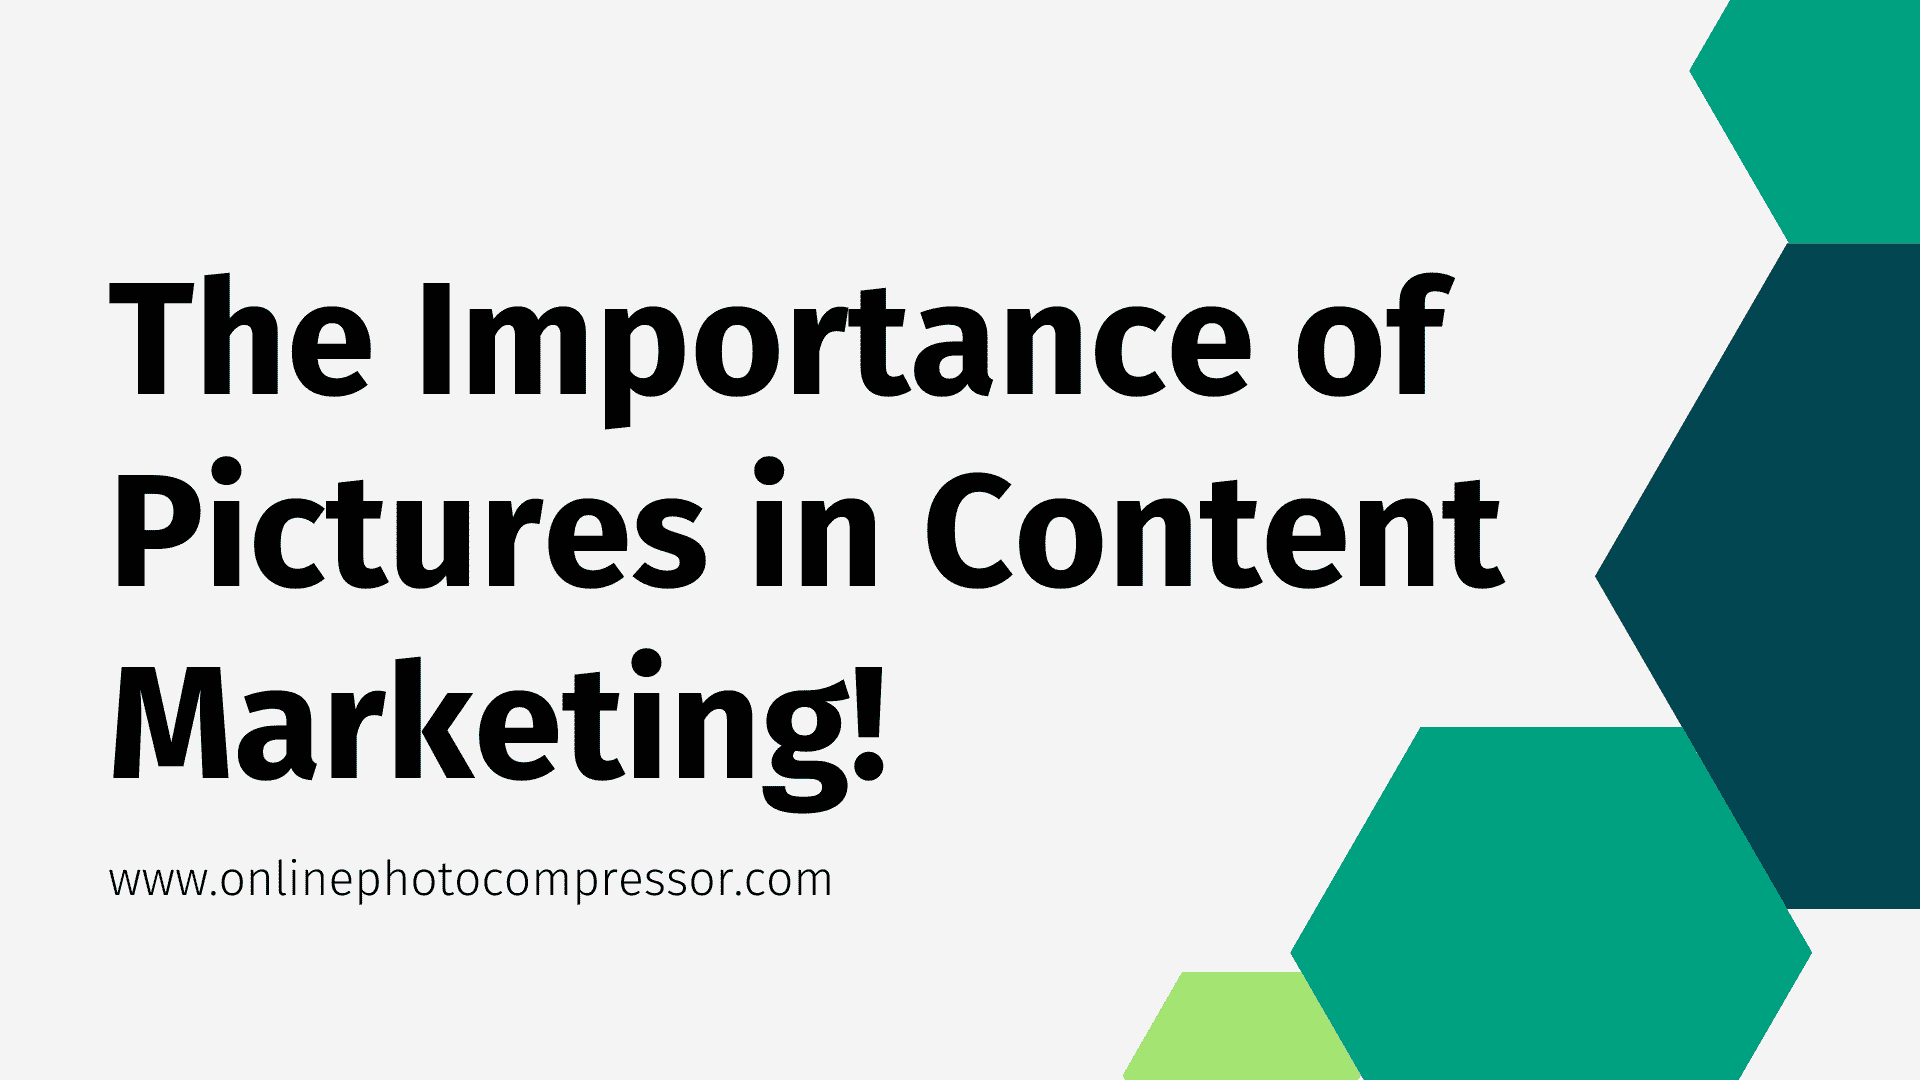 The Importance of Pictures in Content Marketing